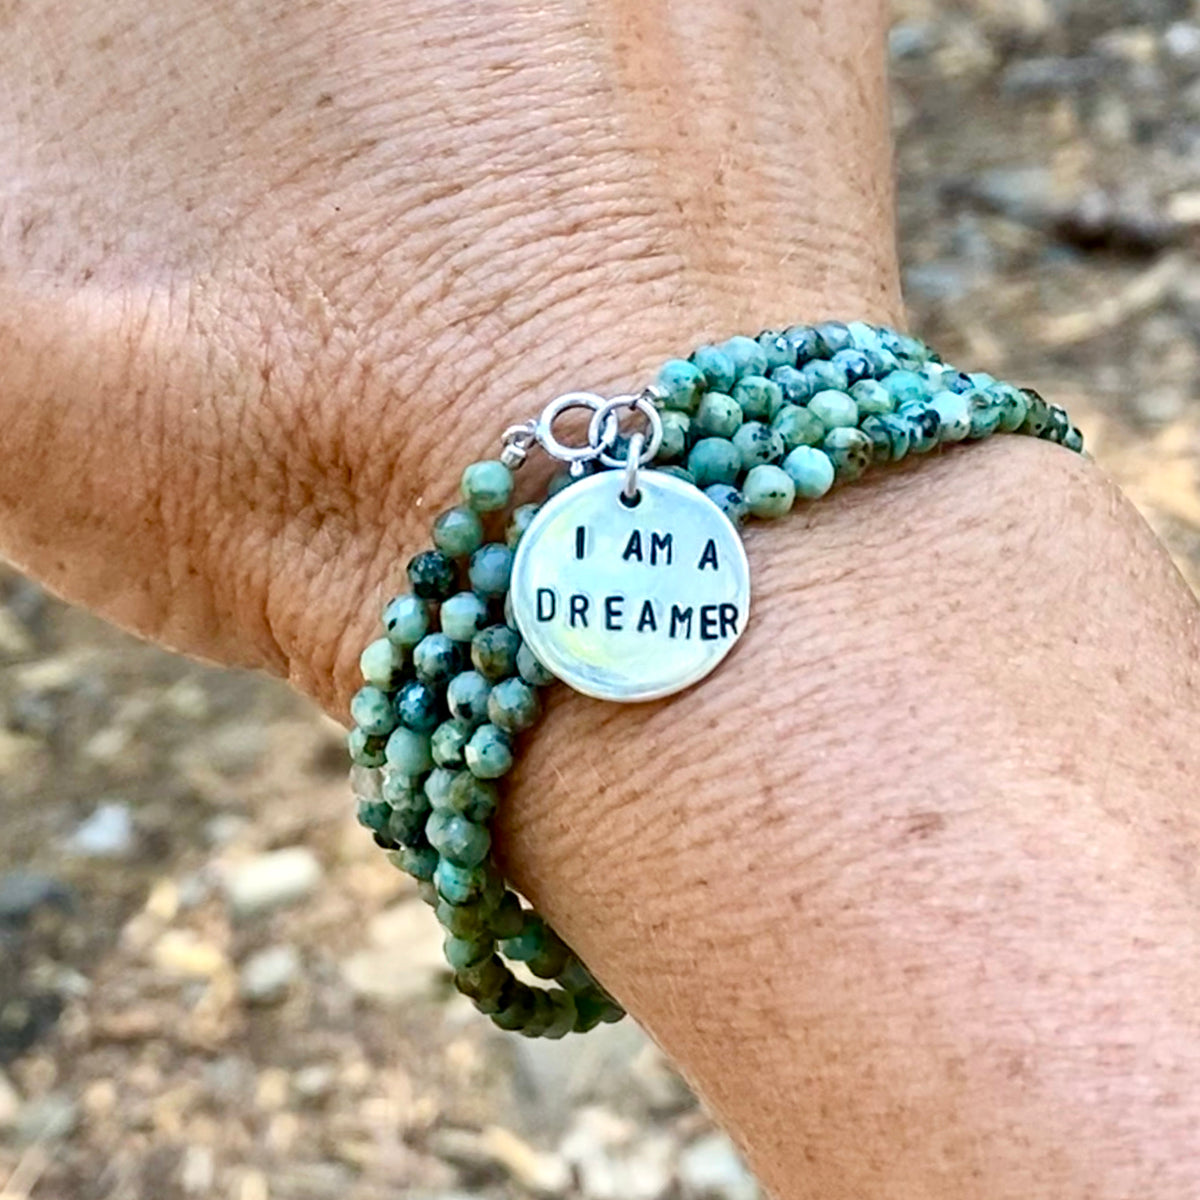 I am a Dreamer - Affirmation Wrap Bracelet with African Turquoise